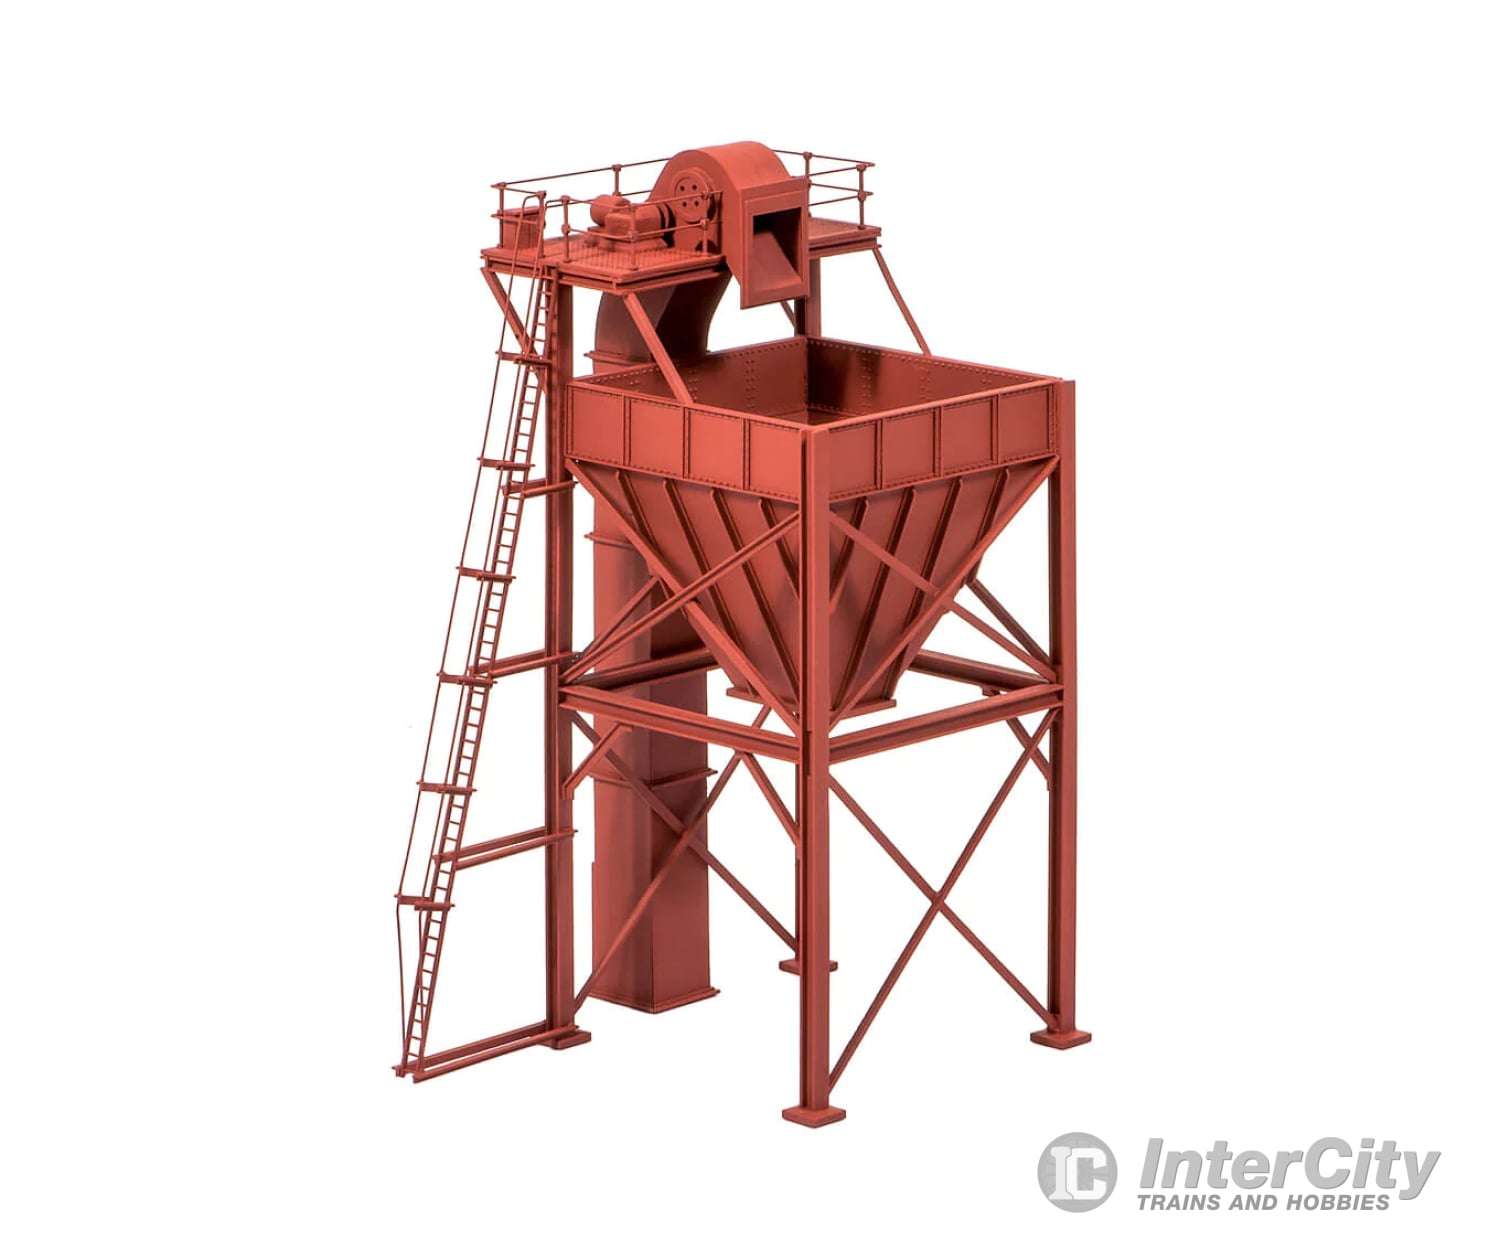 Peco 547 Hopper-Style Steel Coaling Tower - Kit 4-9/16 X 3-5/8 11.6 9.2Cm Structures